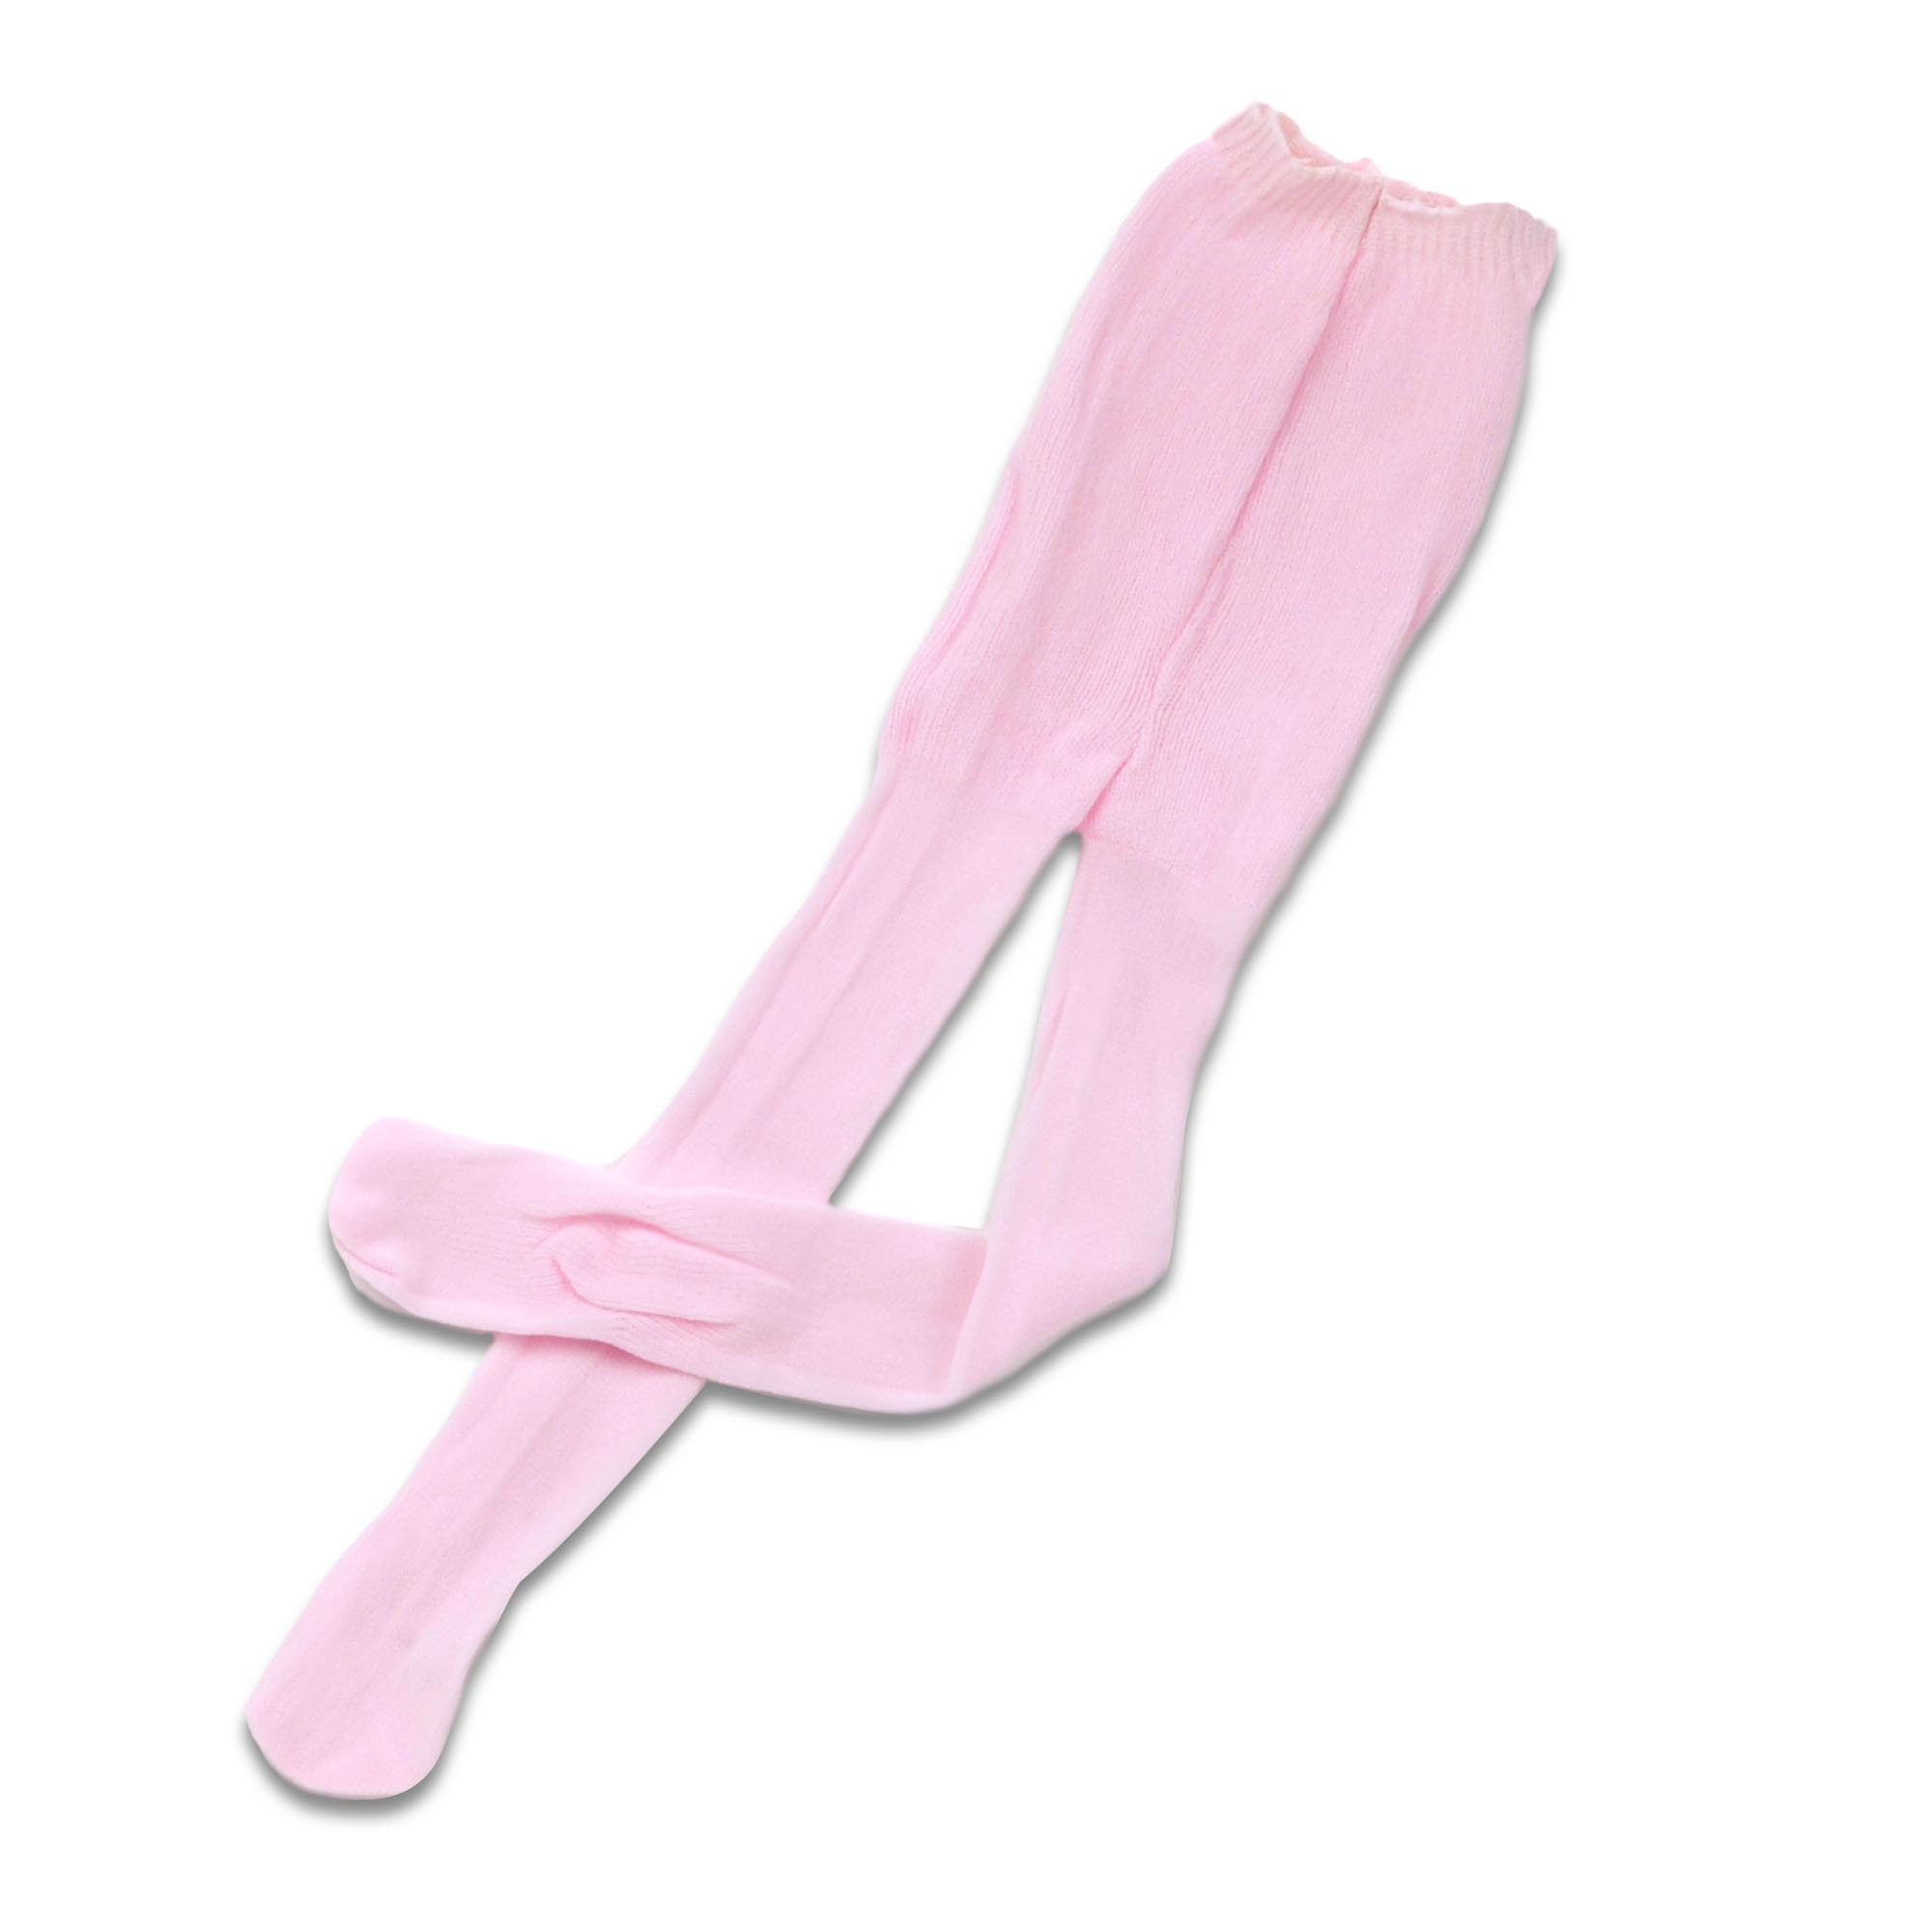 Sophia's 2 Pairs of Tights for 18 Inch Dolls, White / Pink